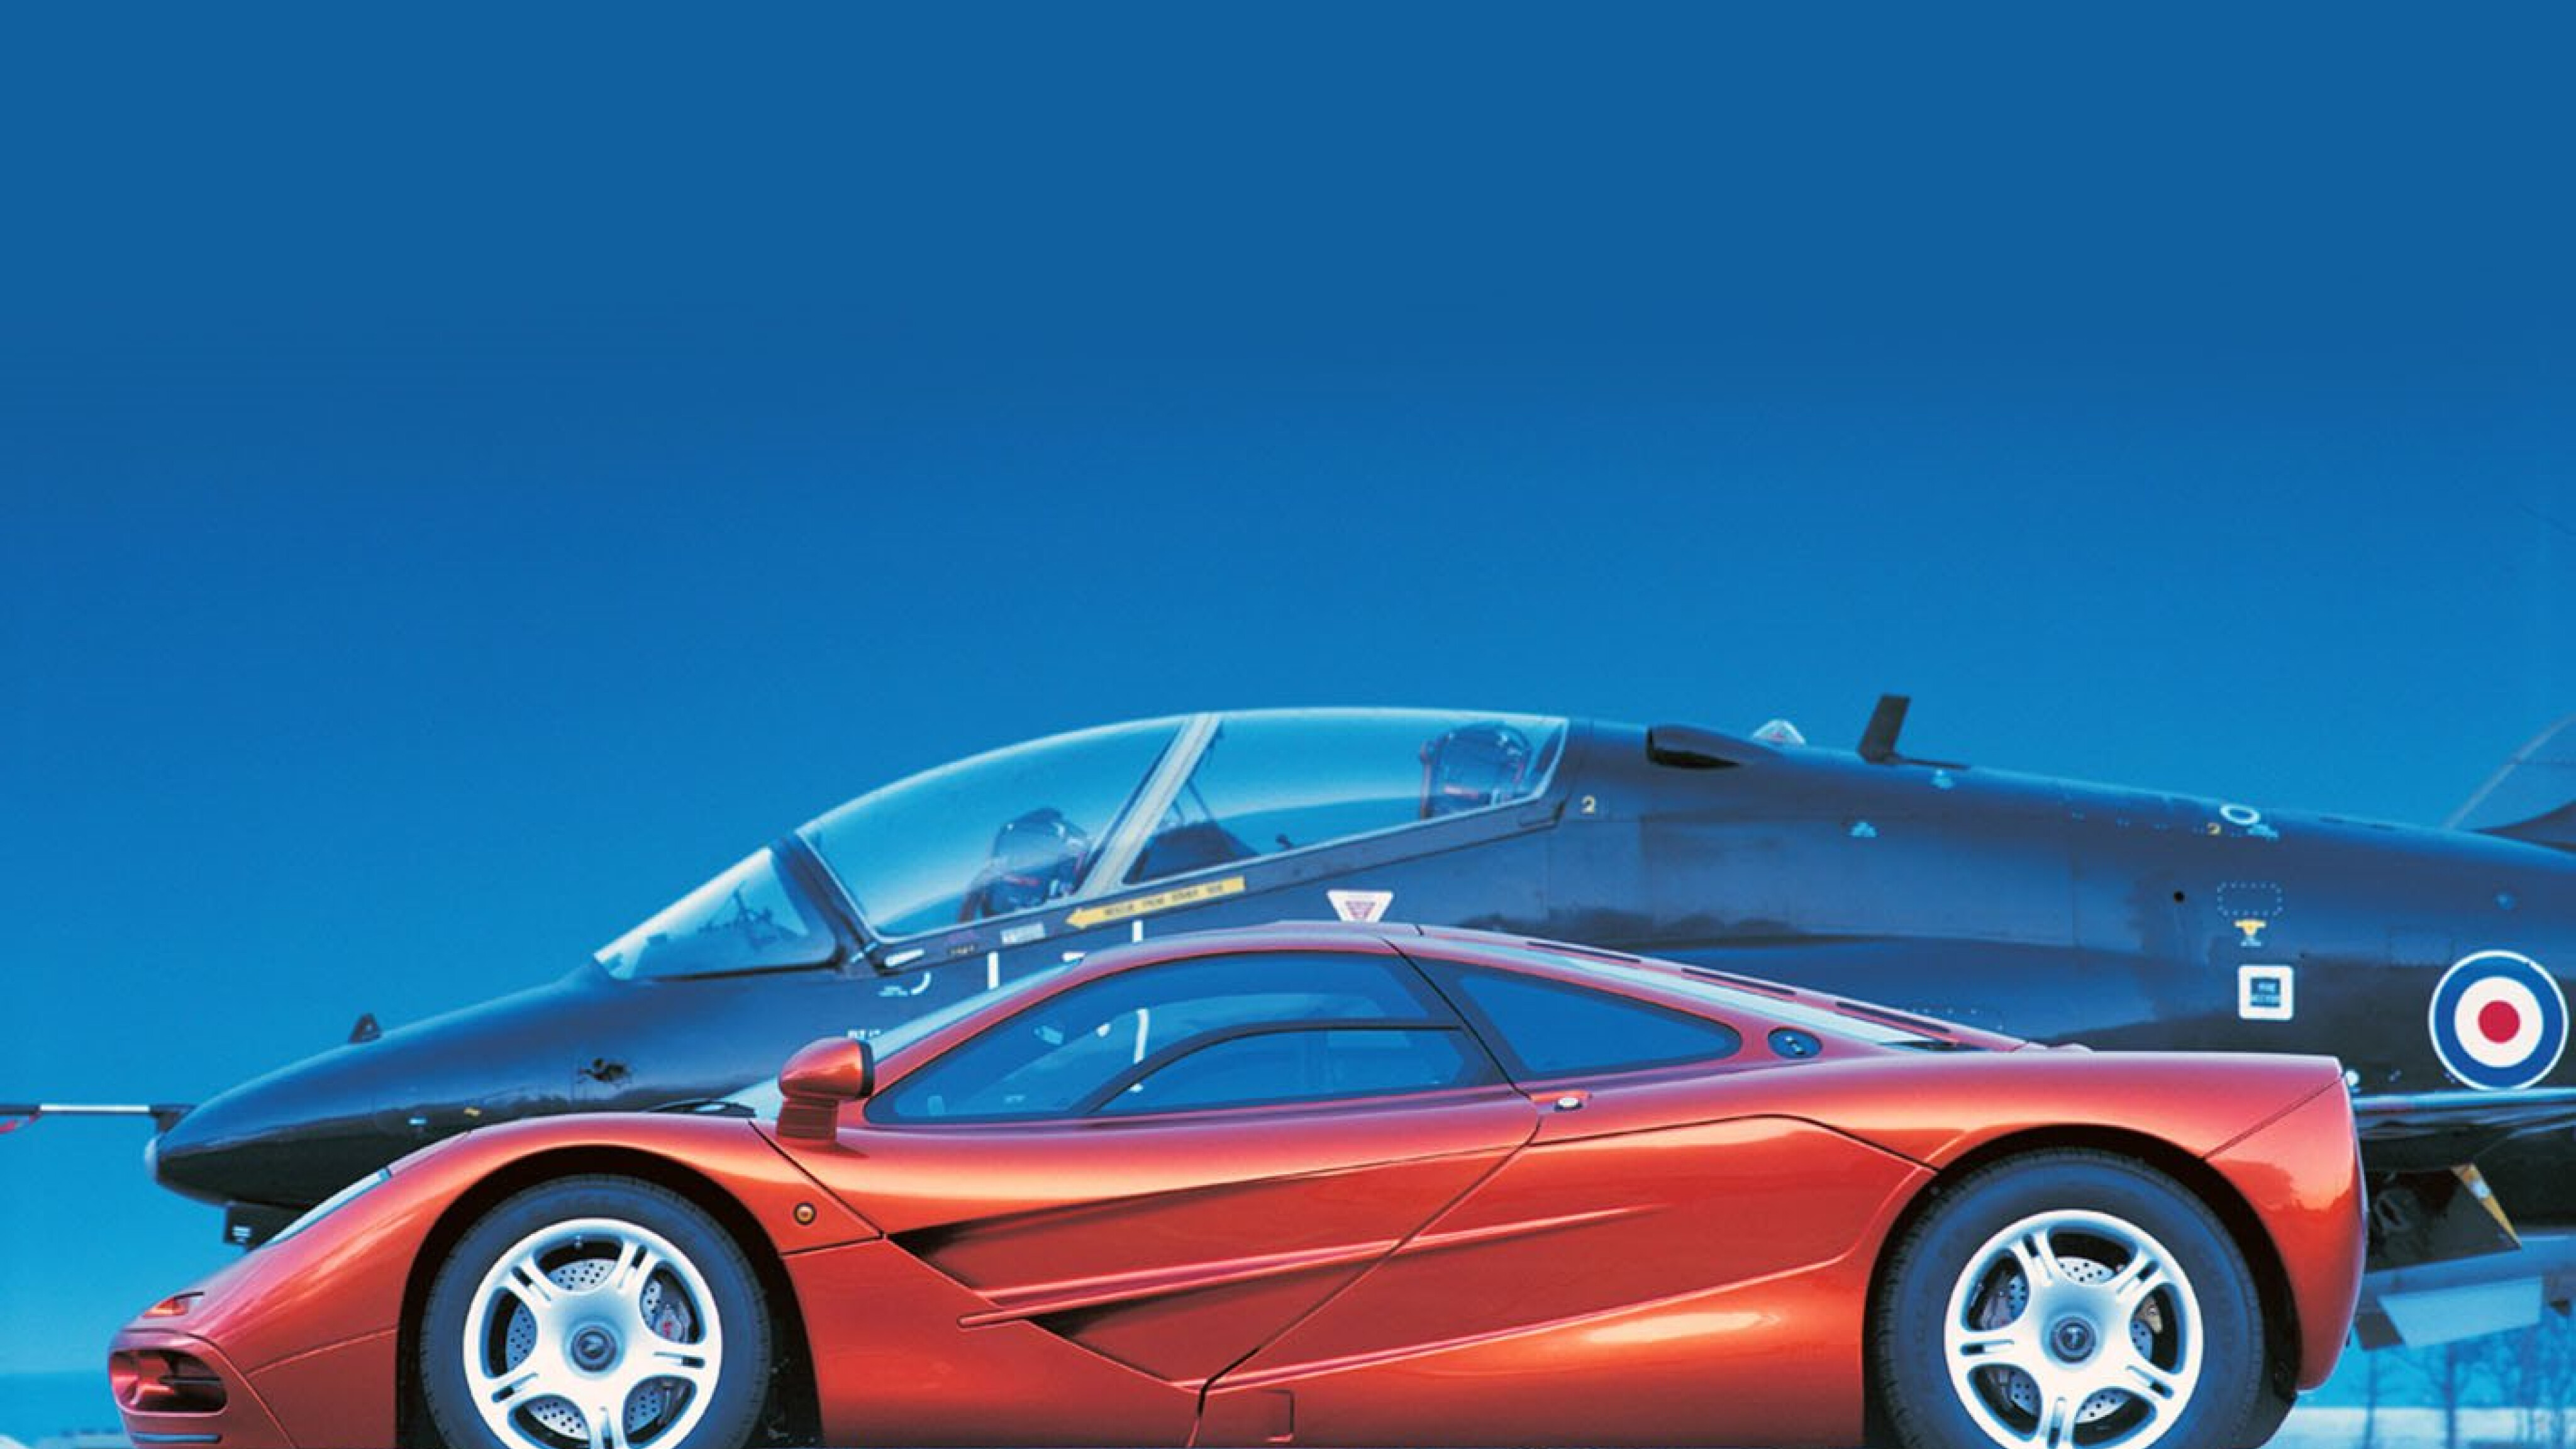 Gordon Murray first used the T.50's fan concept in the original McLaren F1